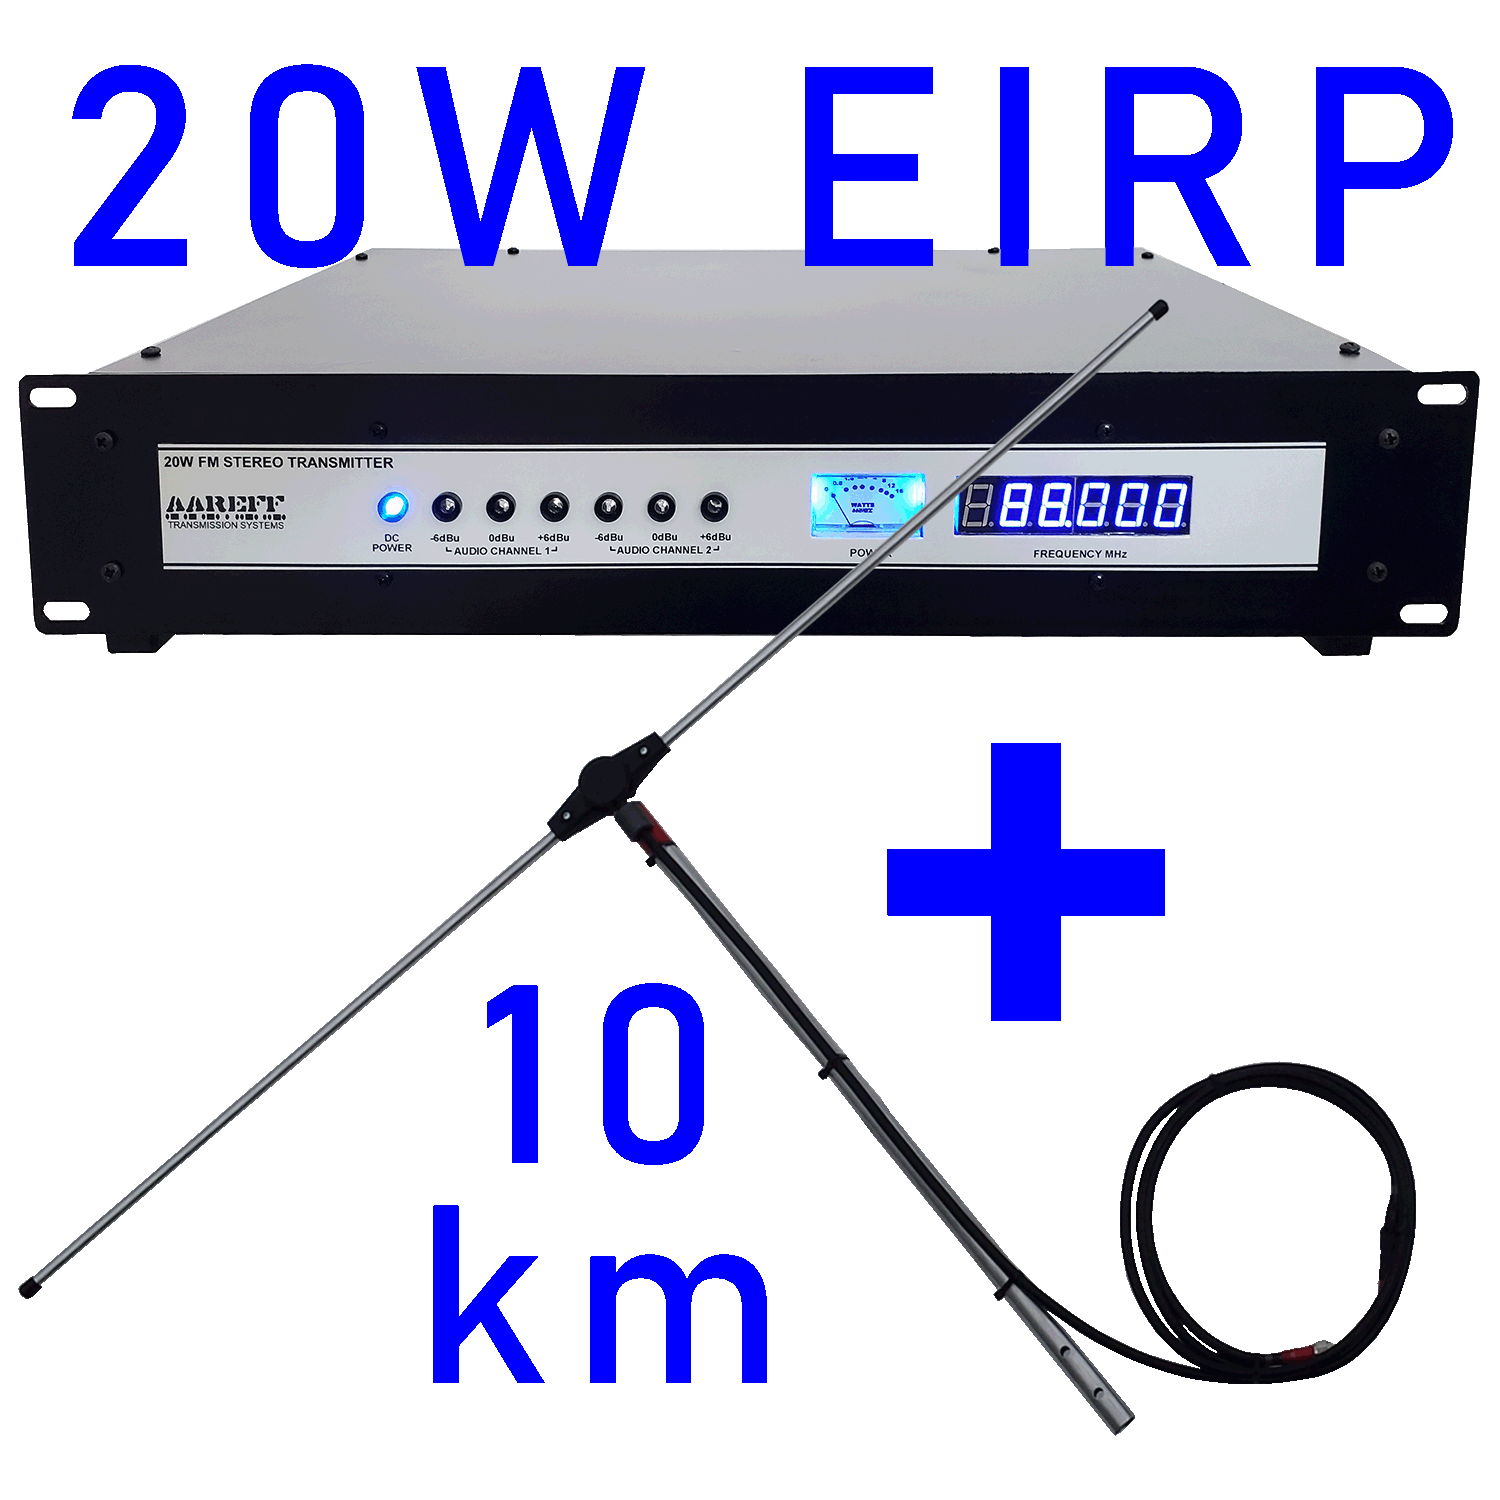 20W EIRP 19 inch professional equipment rack with FM transmitter and RF amplifier